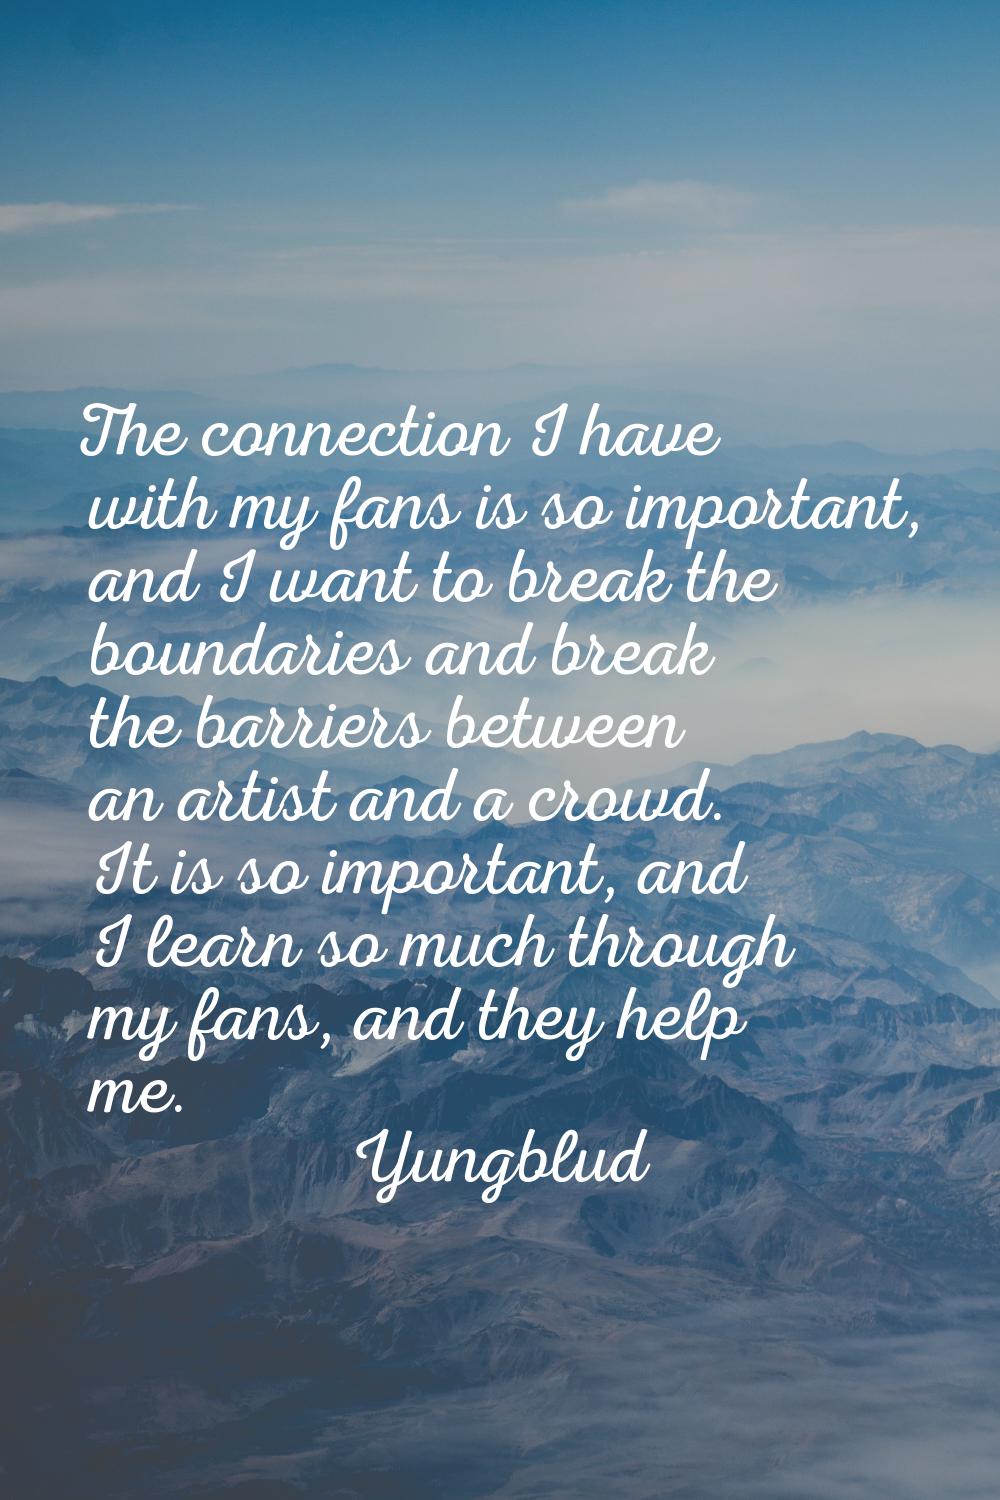 The connection I have with my fans is so important, and I want to break the boundaries and break th